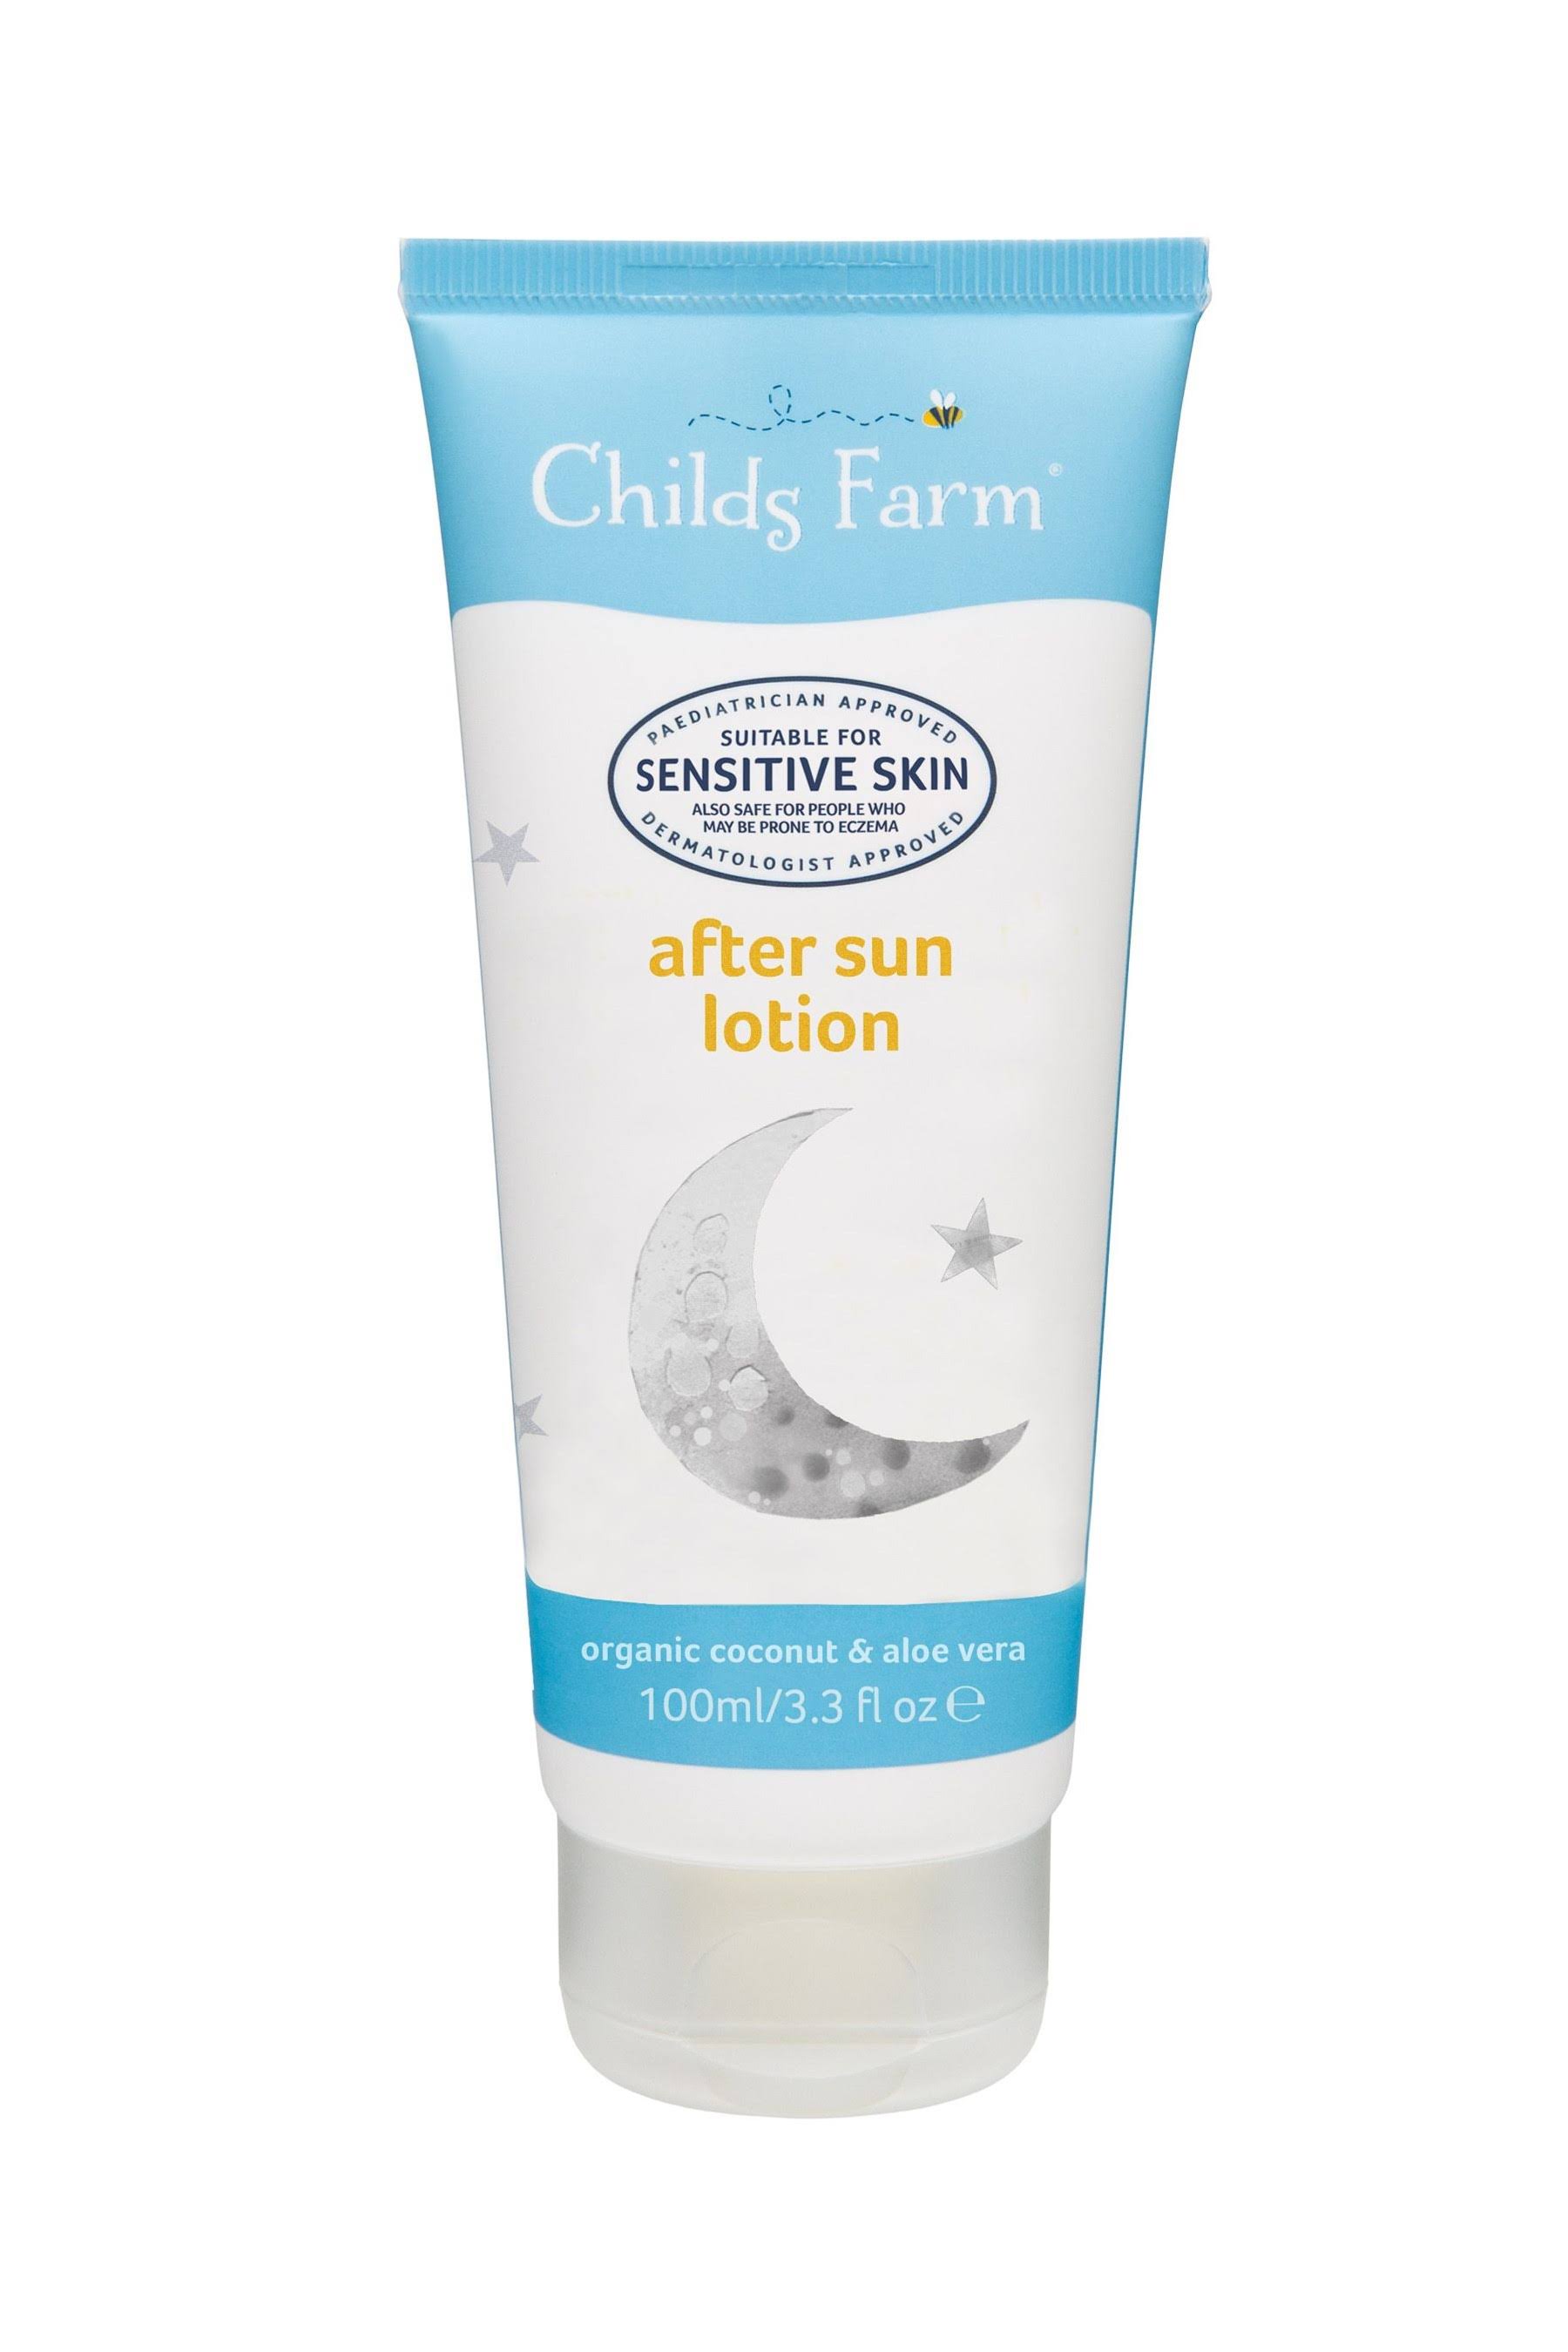 Childs Farm Coconut After Sun Lotion 100ml